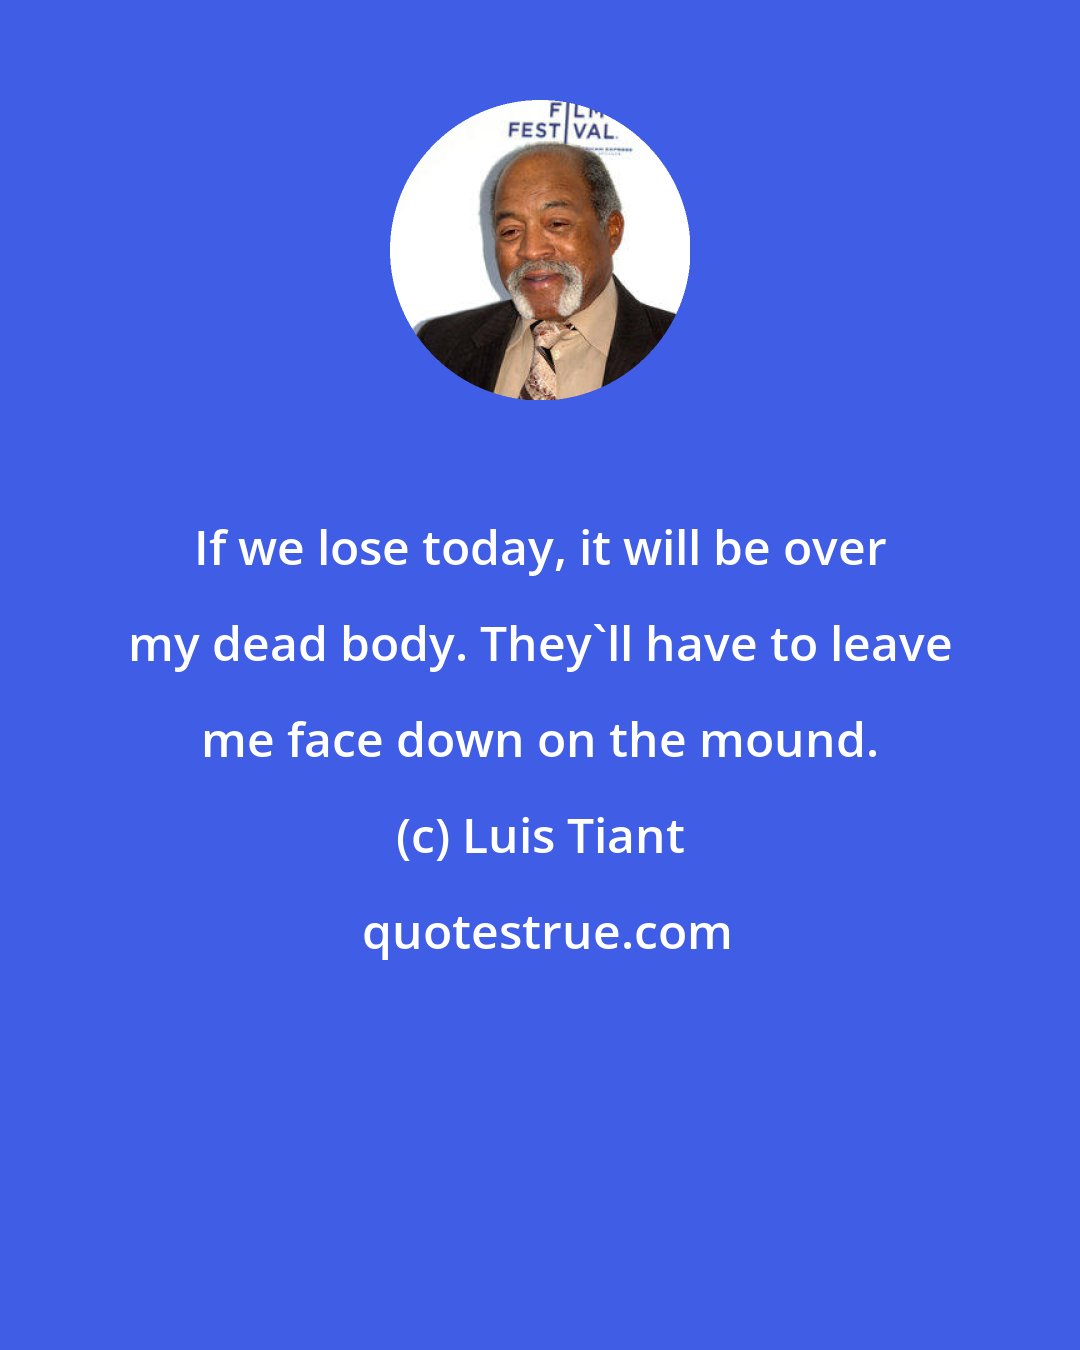 Luis Tiant: If we lose today, it will be over my dead body. They'll have to leave me face down on the mound.